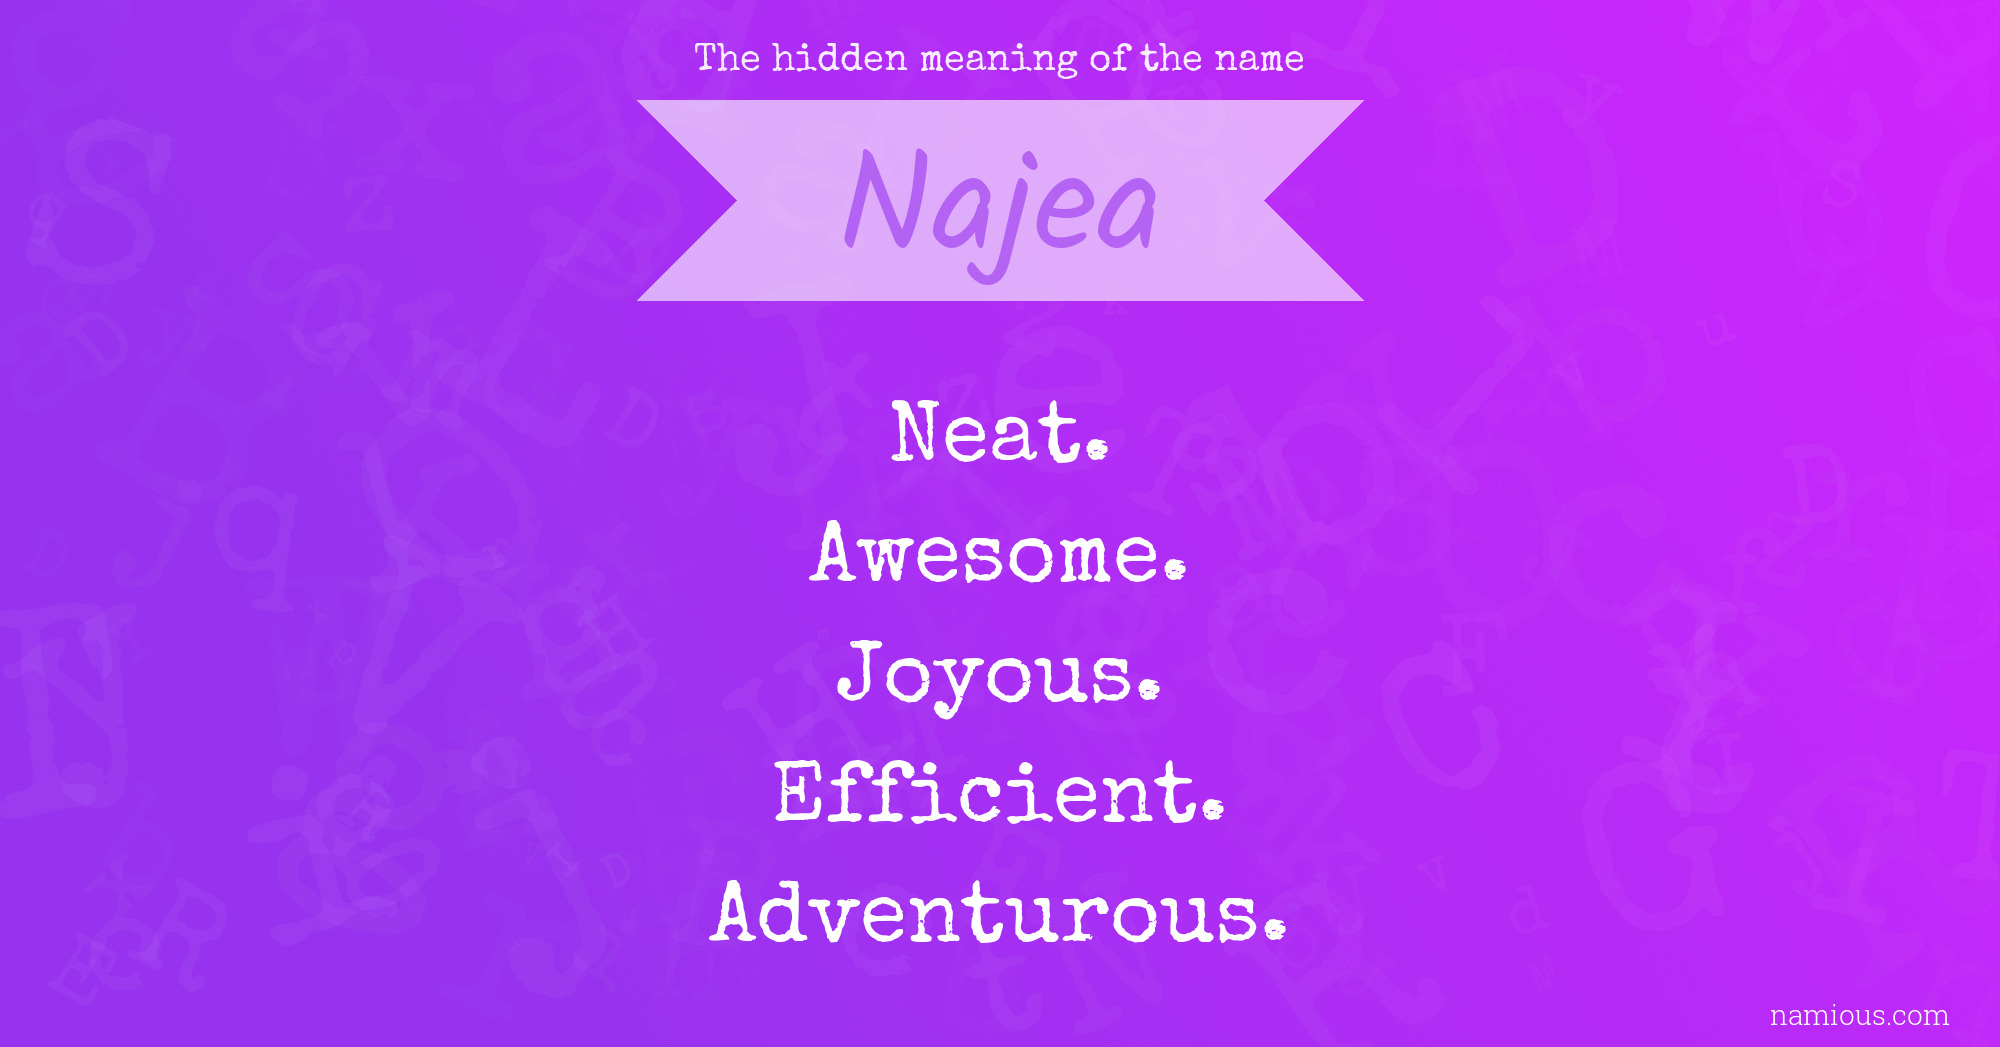 The hidden meaning of the name Najea